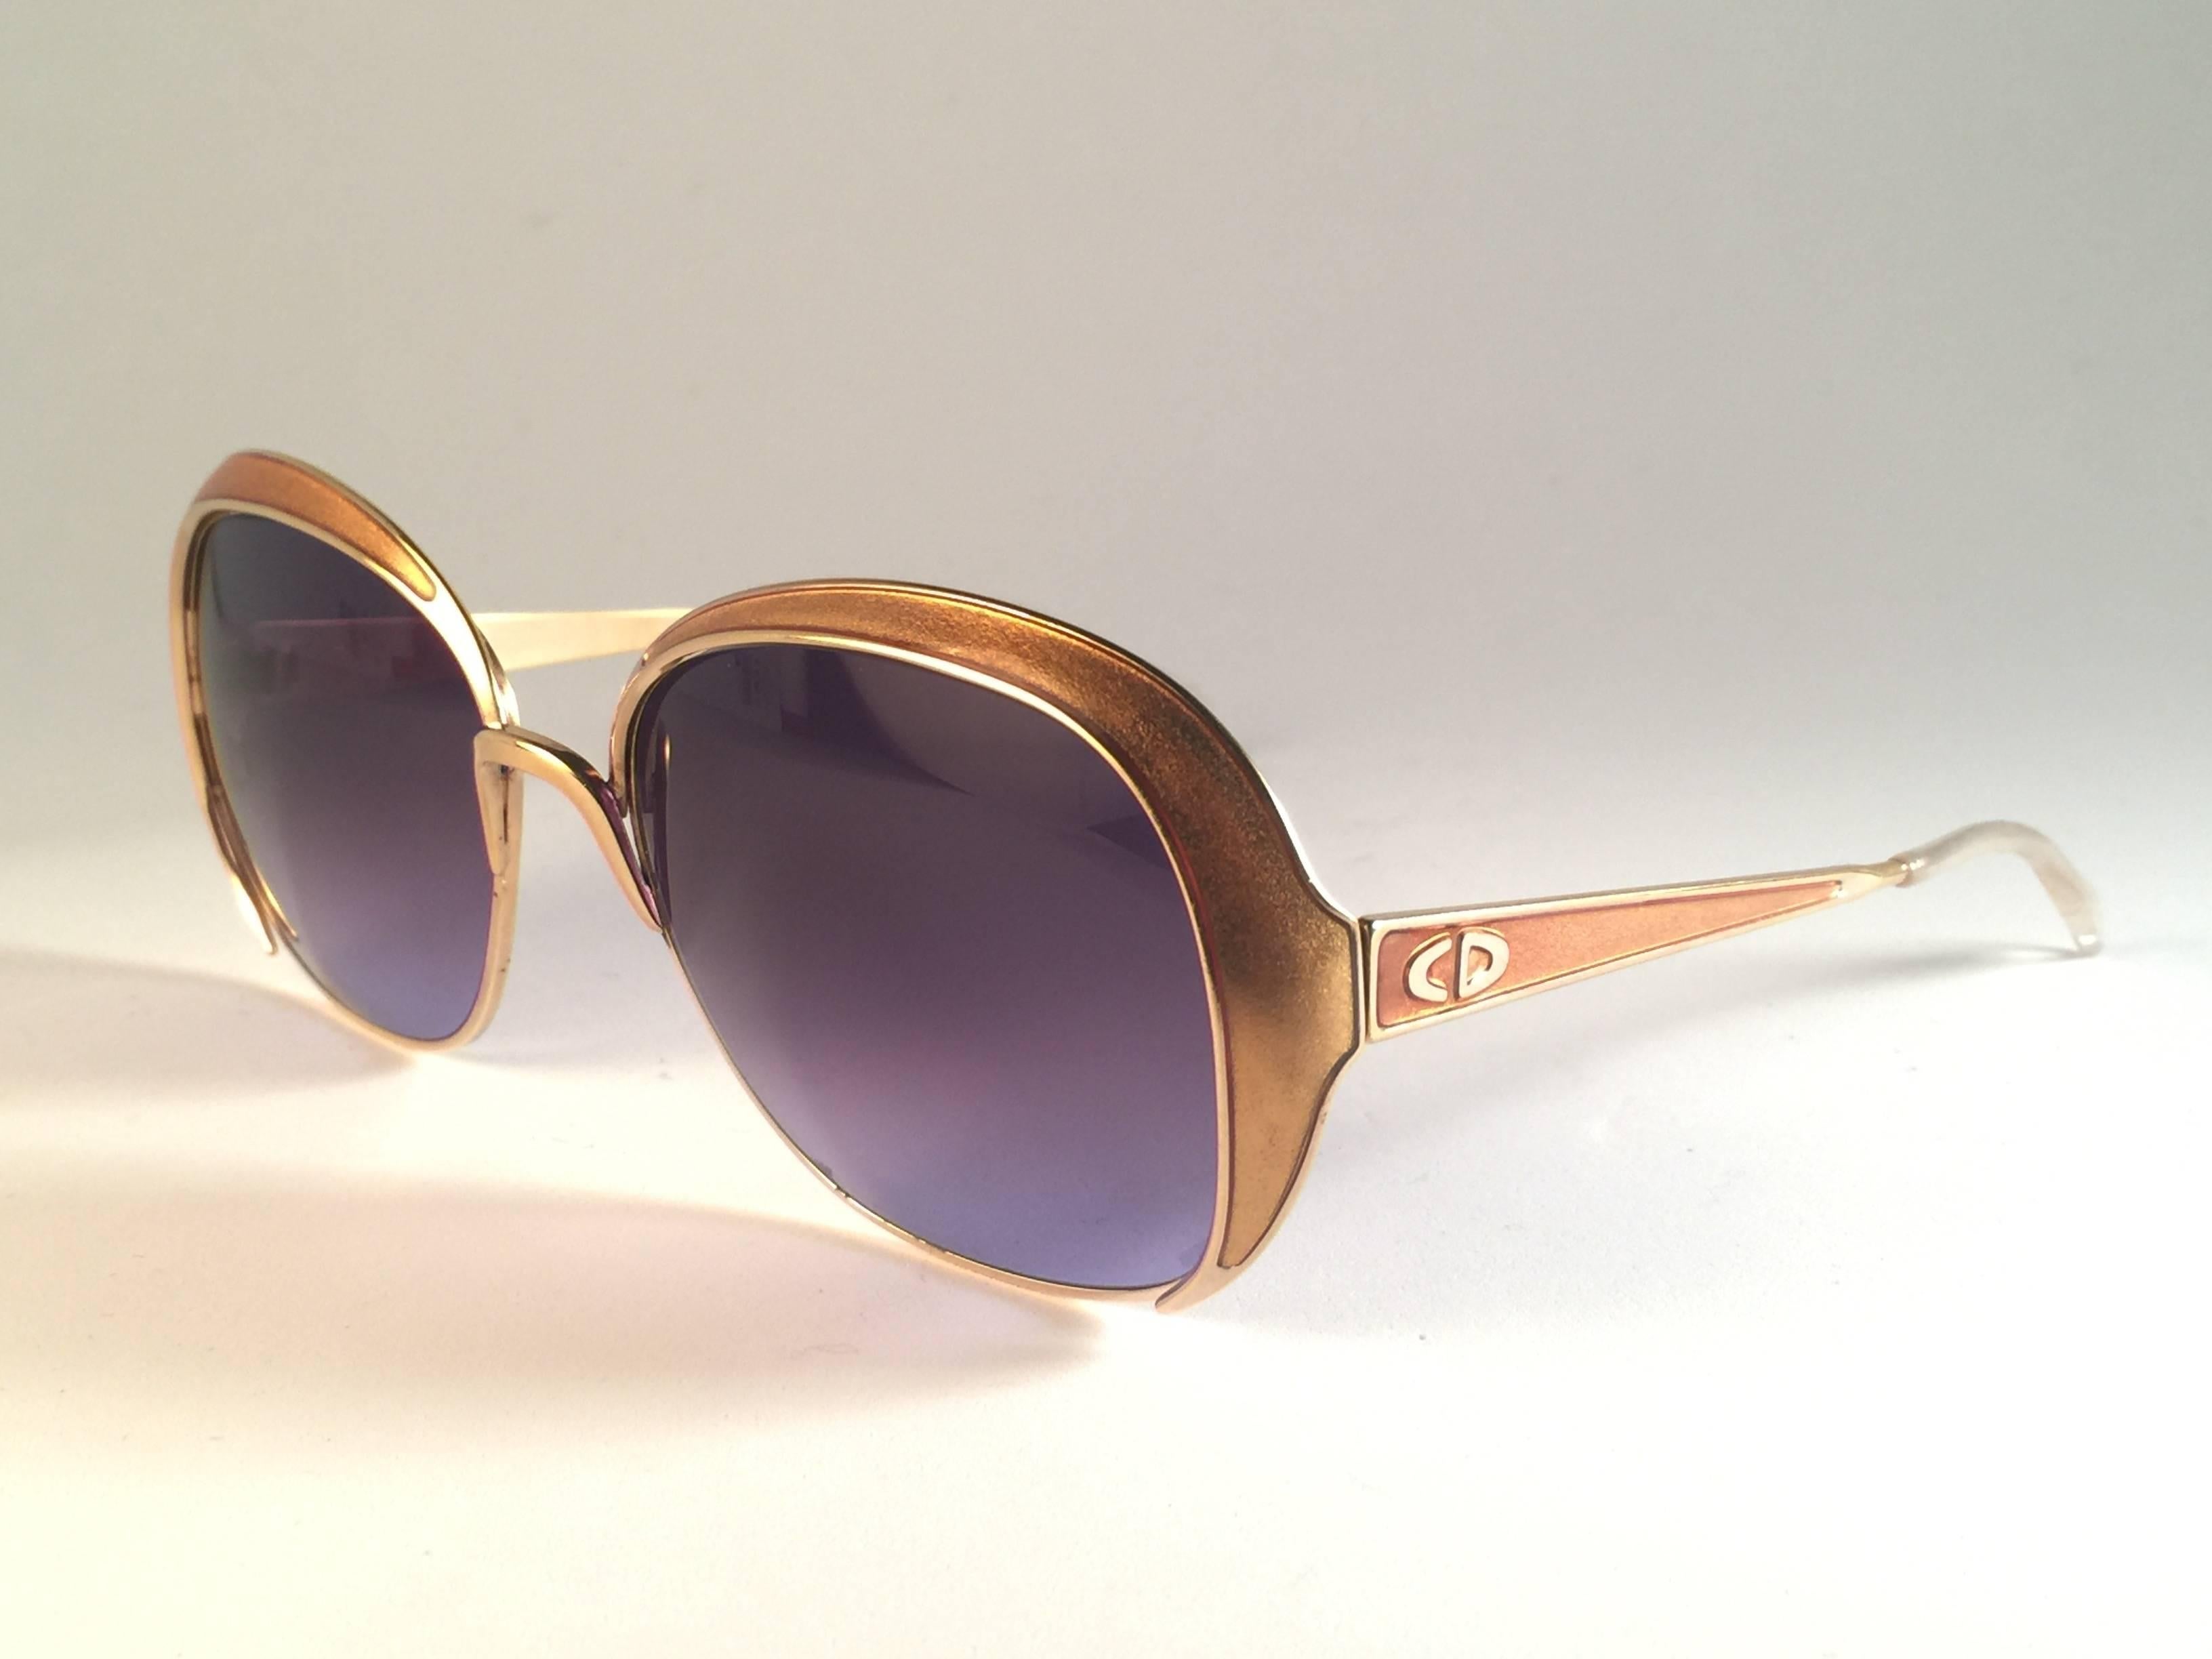 New Vintage Christian Dior 2132 44 Gold and Black Sunglasses Austria at ...